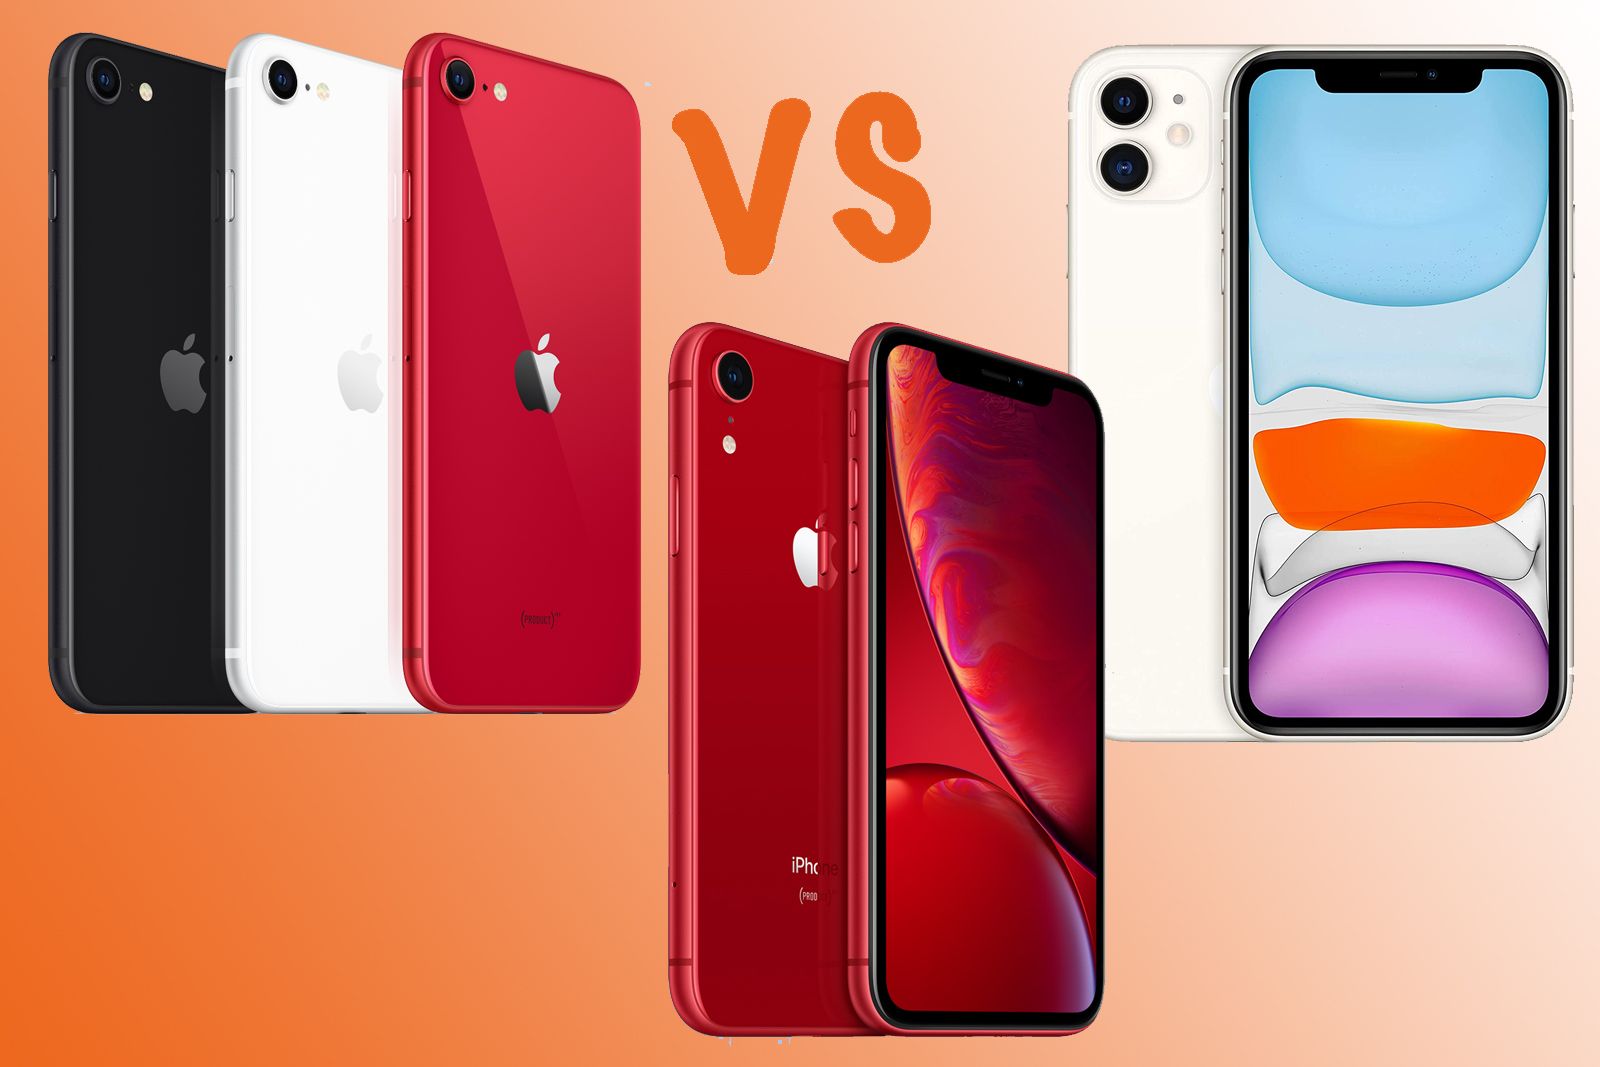 iPhone 11 vs iPhone XS: What's the difference? Your buyer's guide